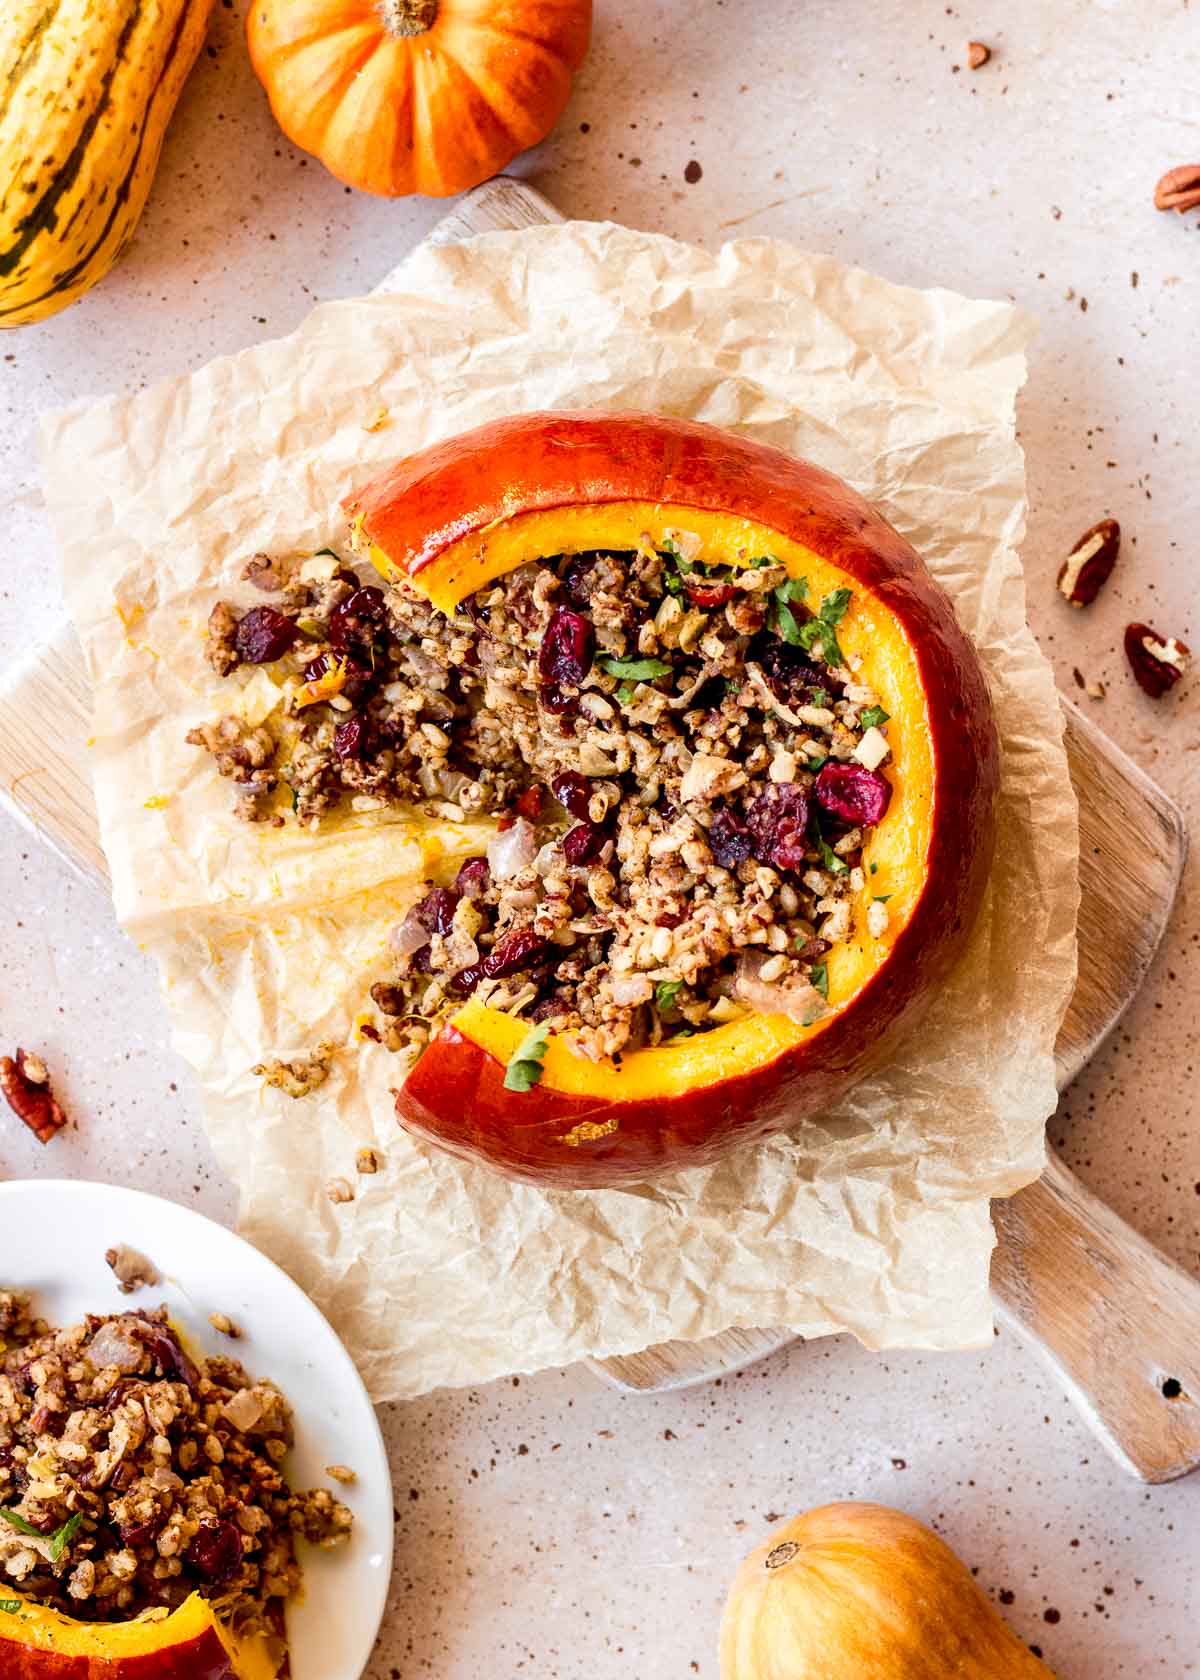 Vegan pumpkin stuffed with rice, pecans and cranberries sits on parchment paper, with small decorated squash and fork in background. A slice has been cut out of the pumpkin and it is on a plate nearby.